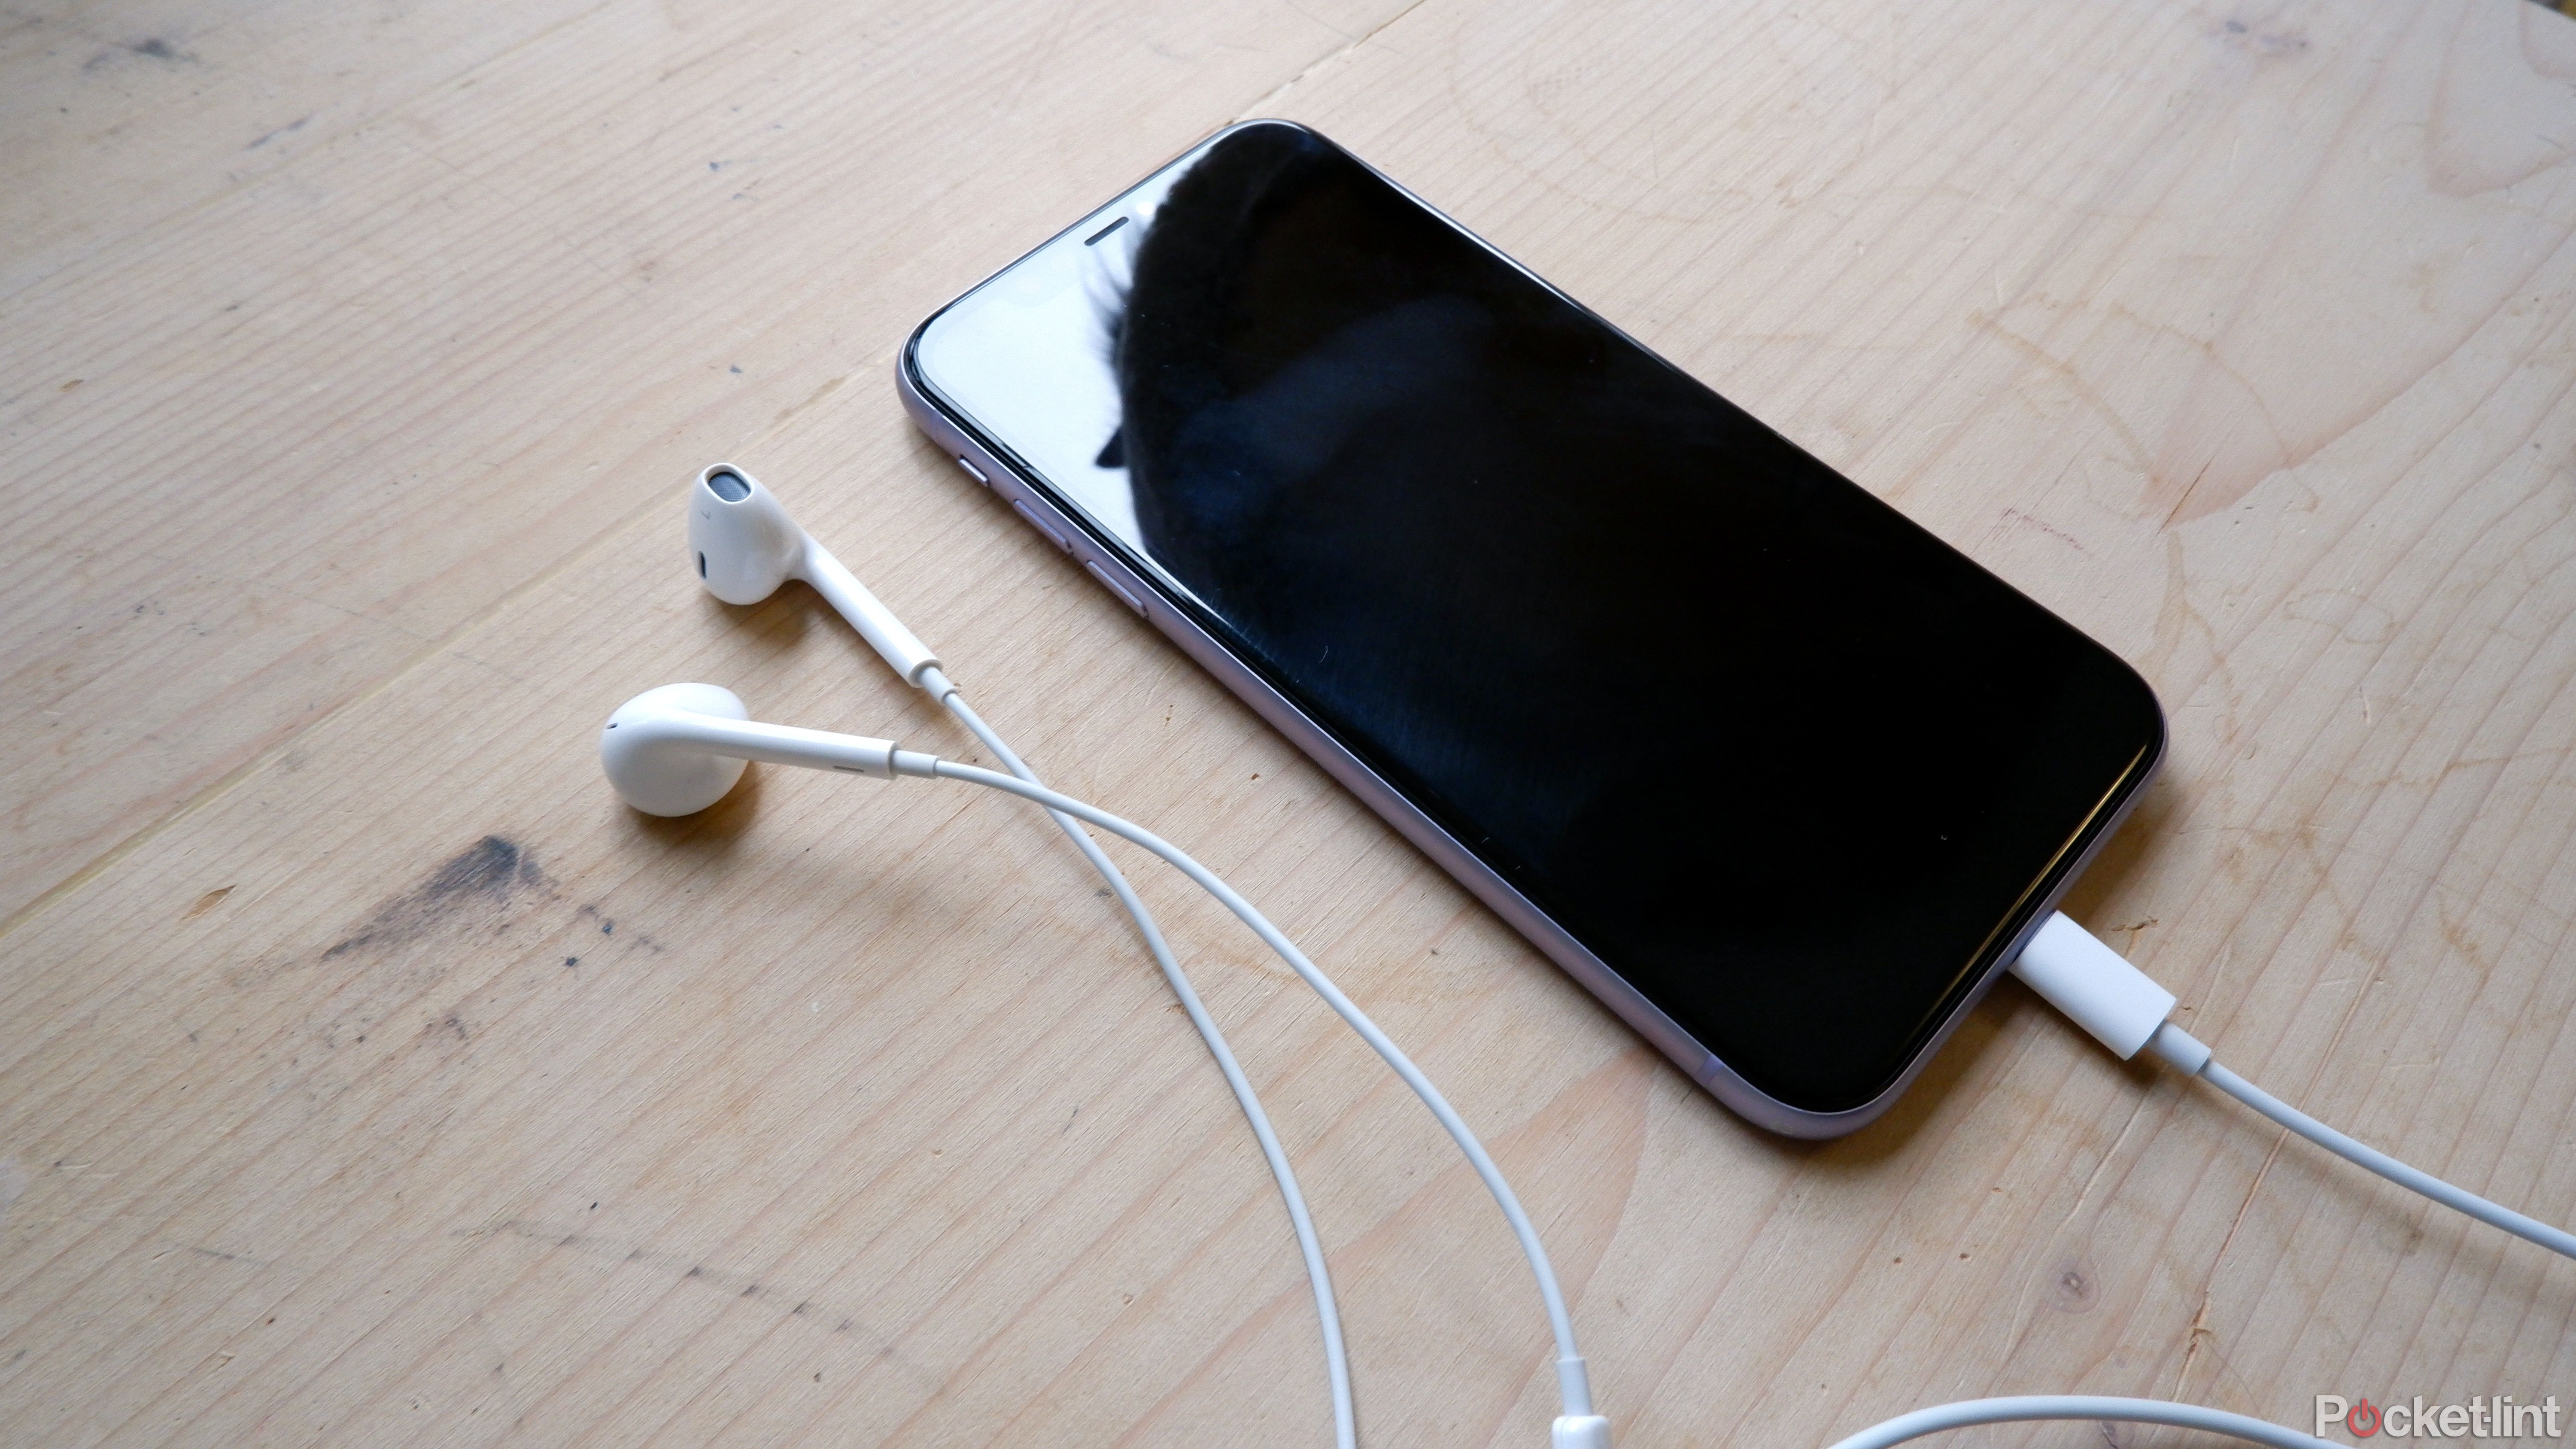 Apple EarPods on a table connected to an iPhone